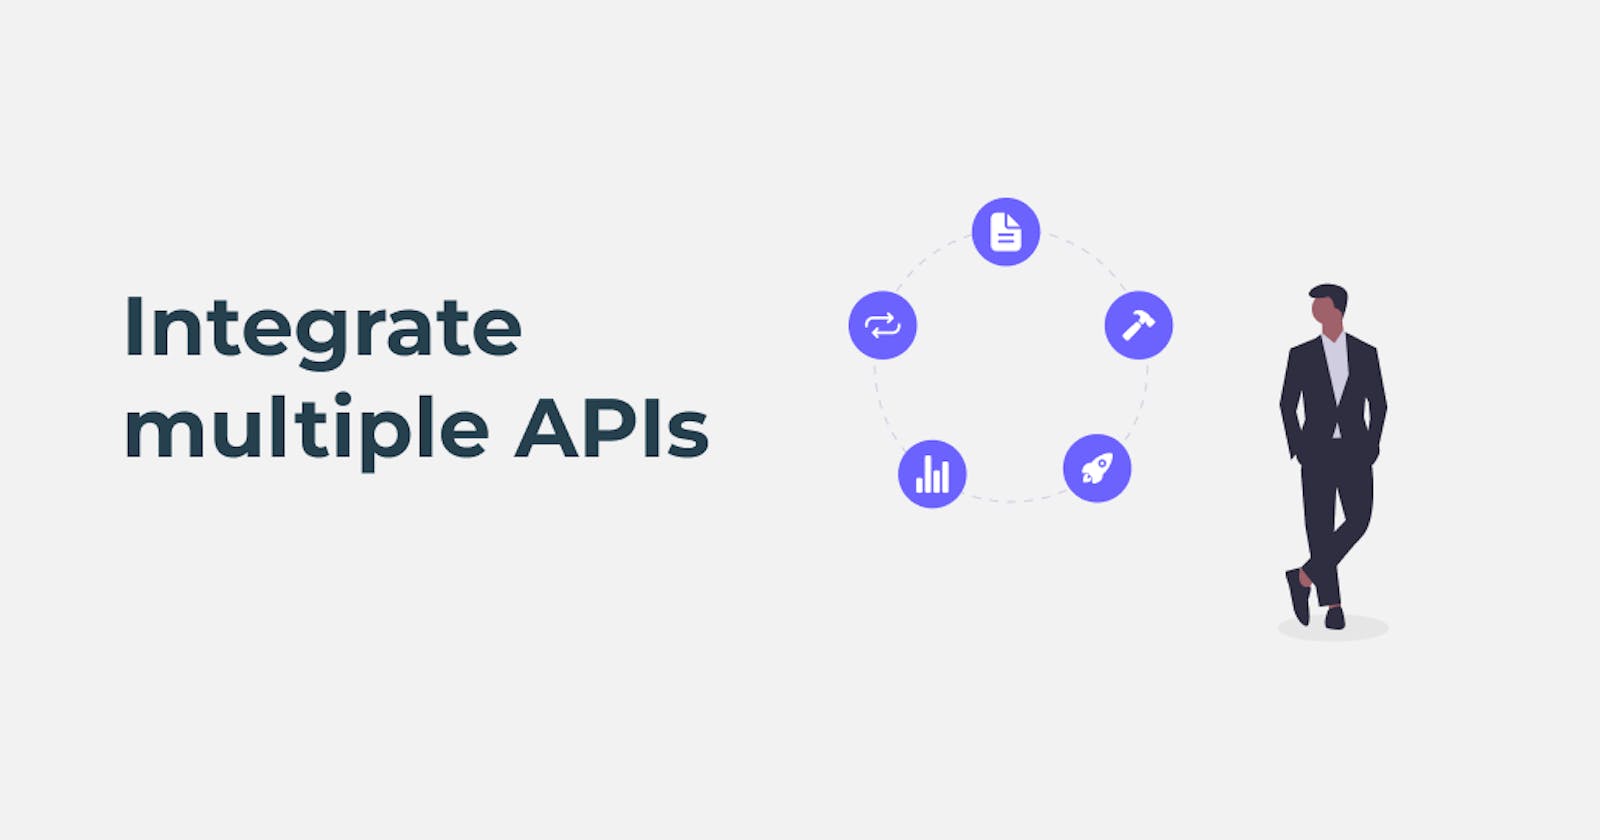 How to unify disparate APIs with low code